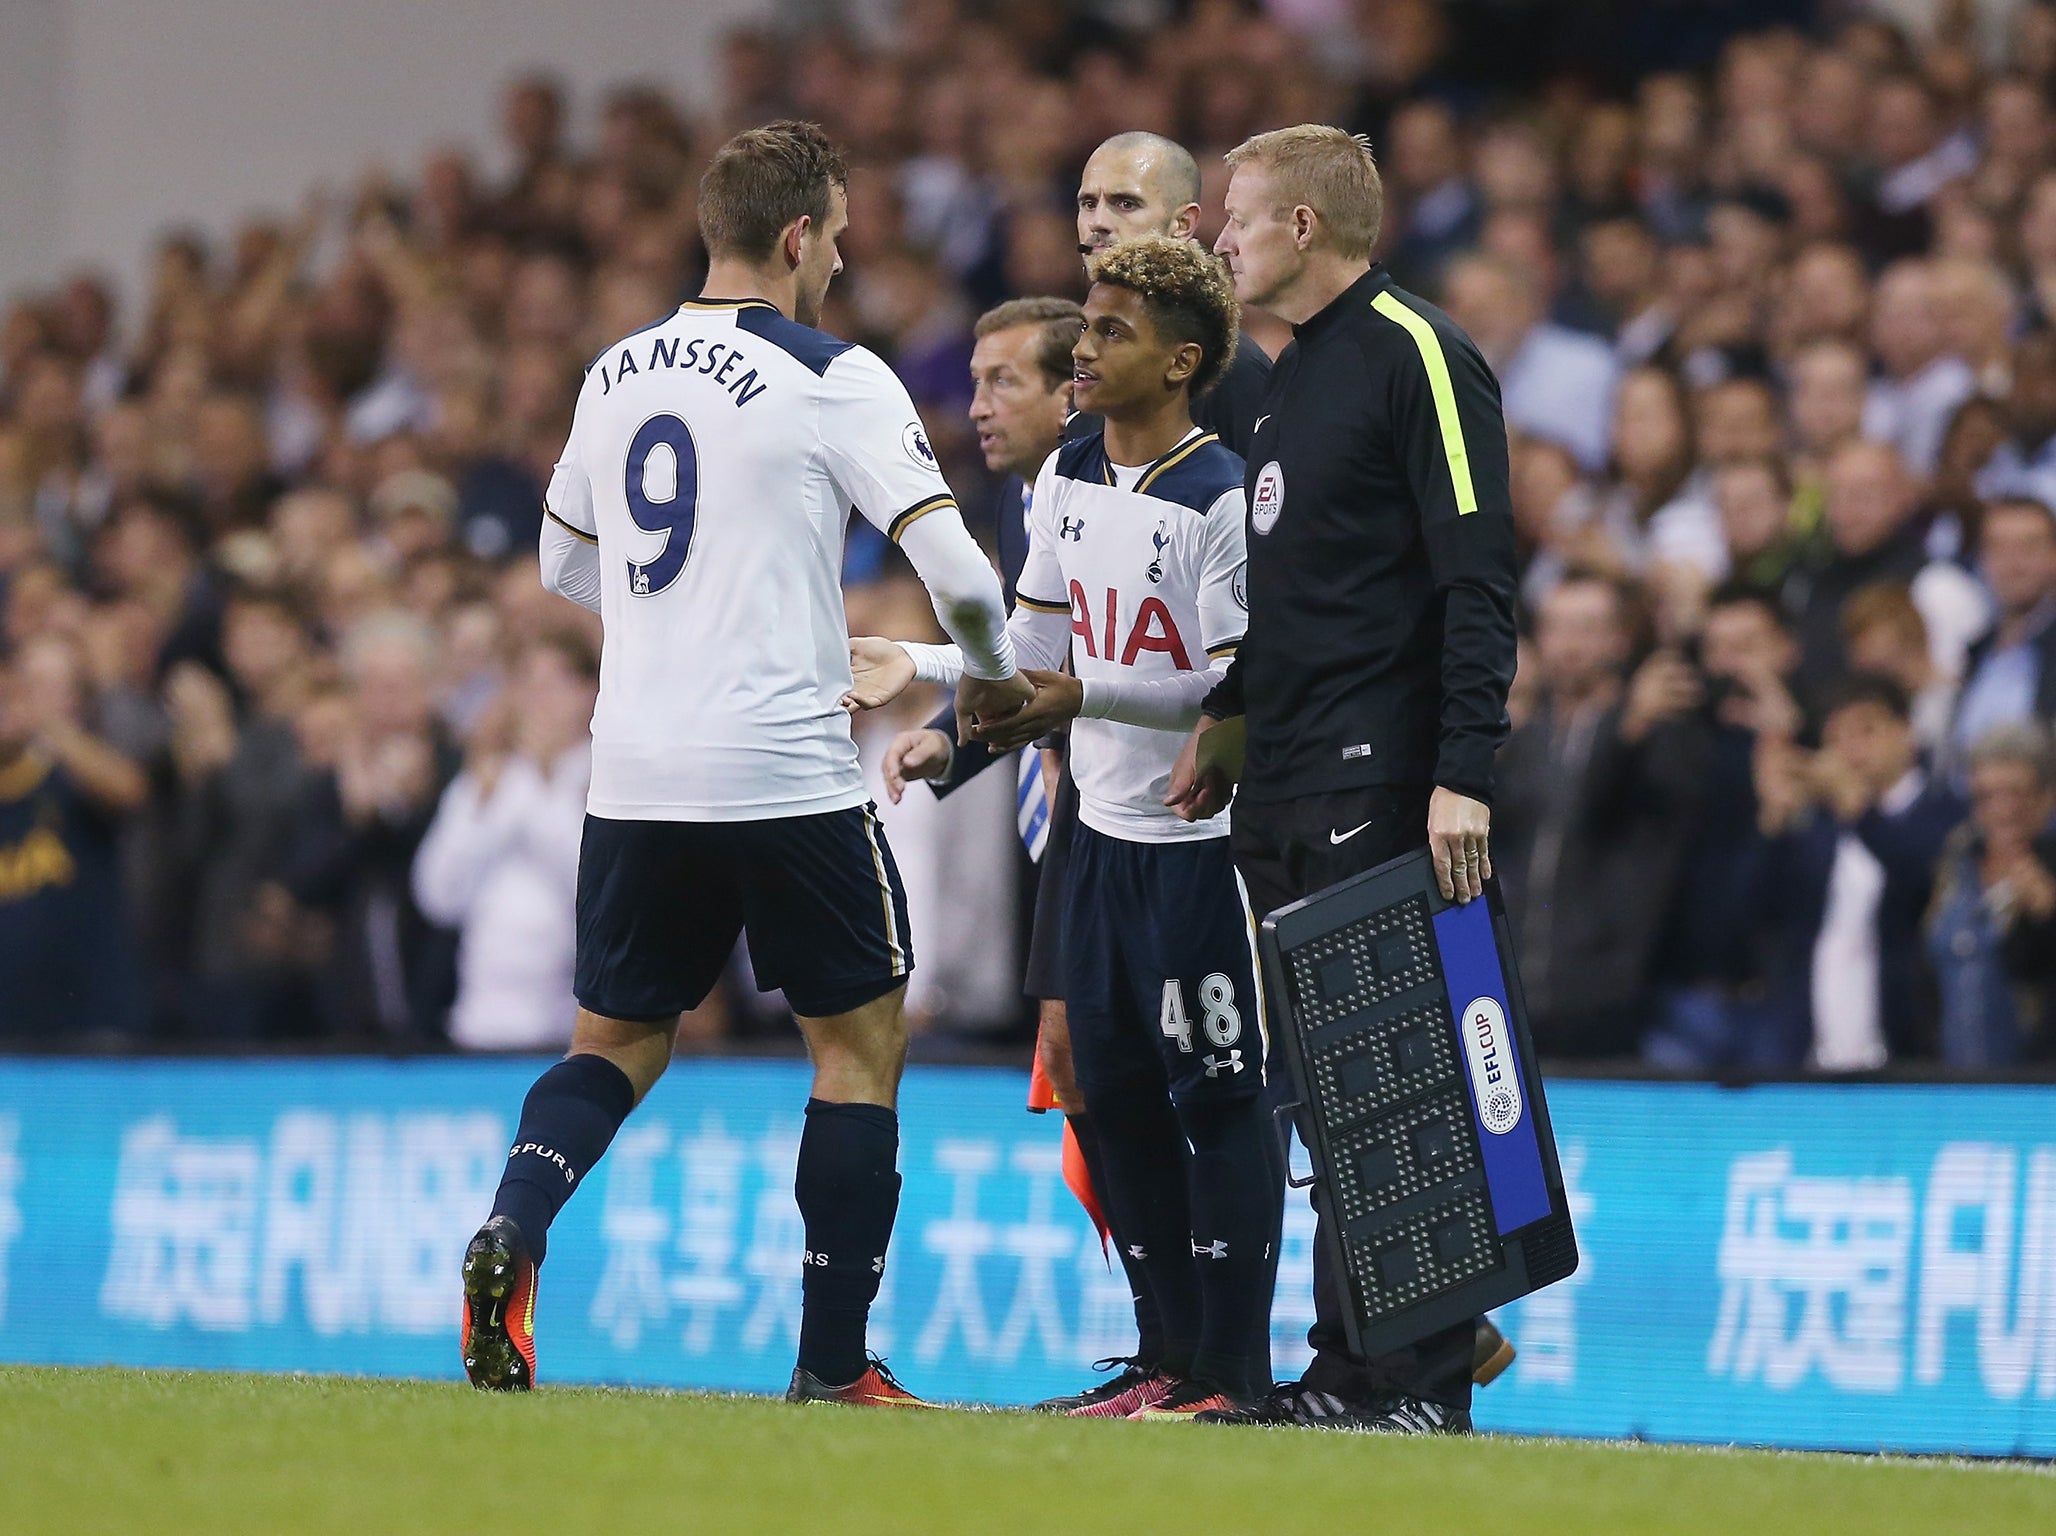 Edwards making his first-team debut for Tottenham